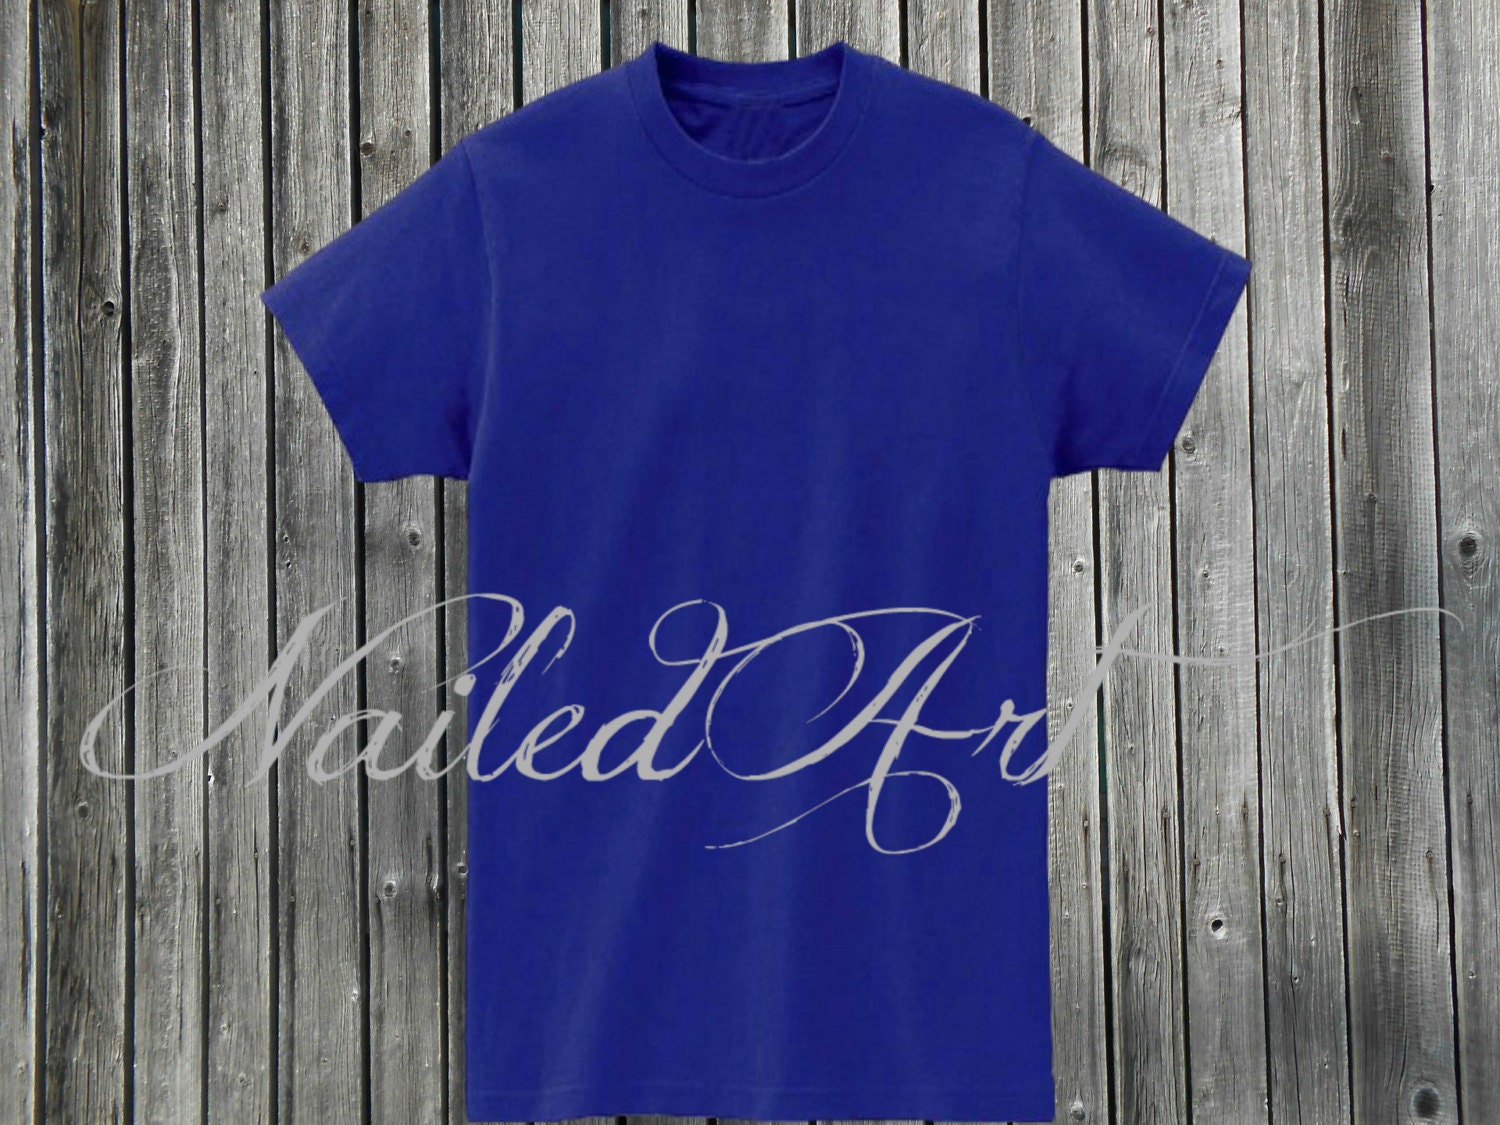 Download Blank Blue T-Shirt Mockup Front and Back Graphic by NailedArt1